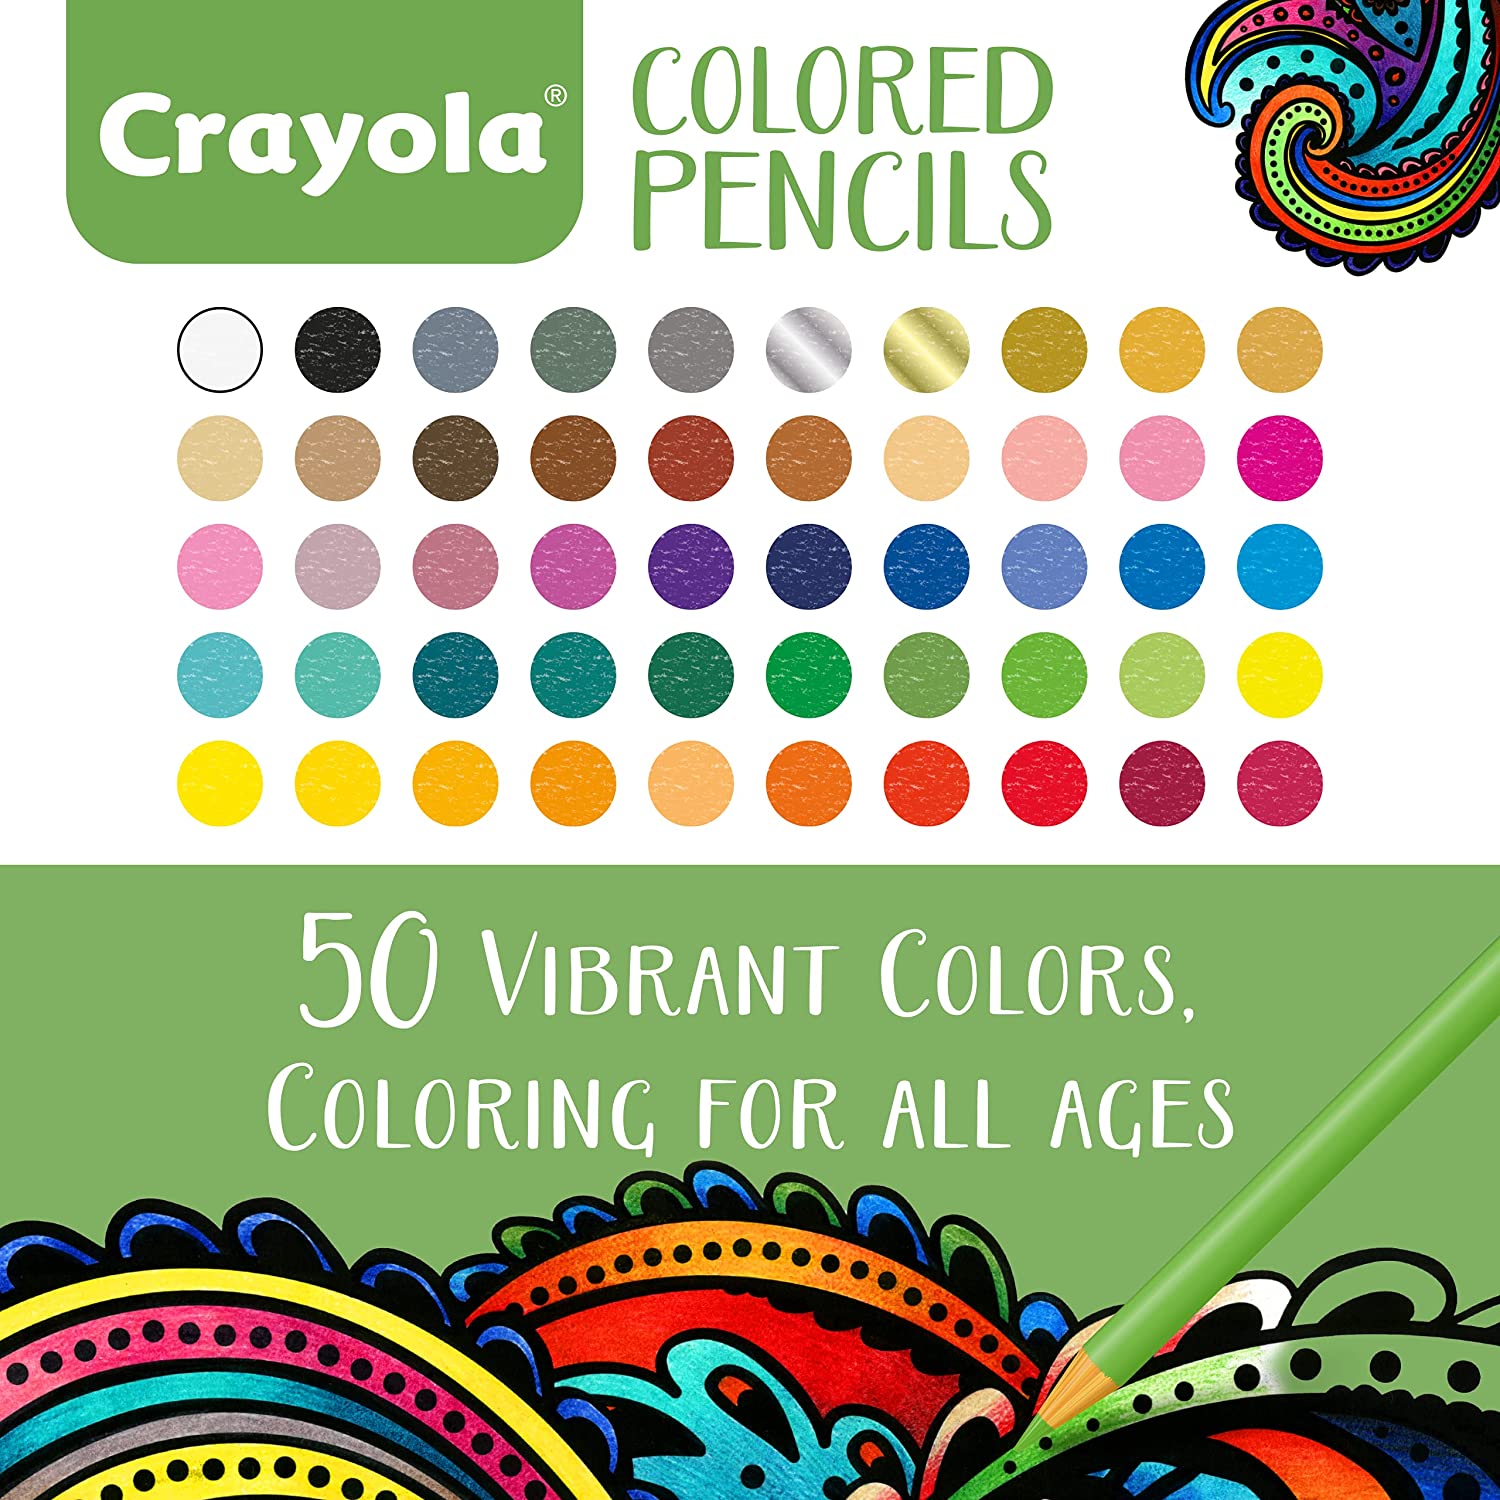 Crayola Aged Up Adult Coloring Colored Pencils and Fine Line